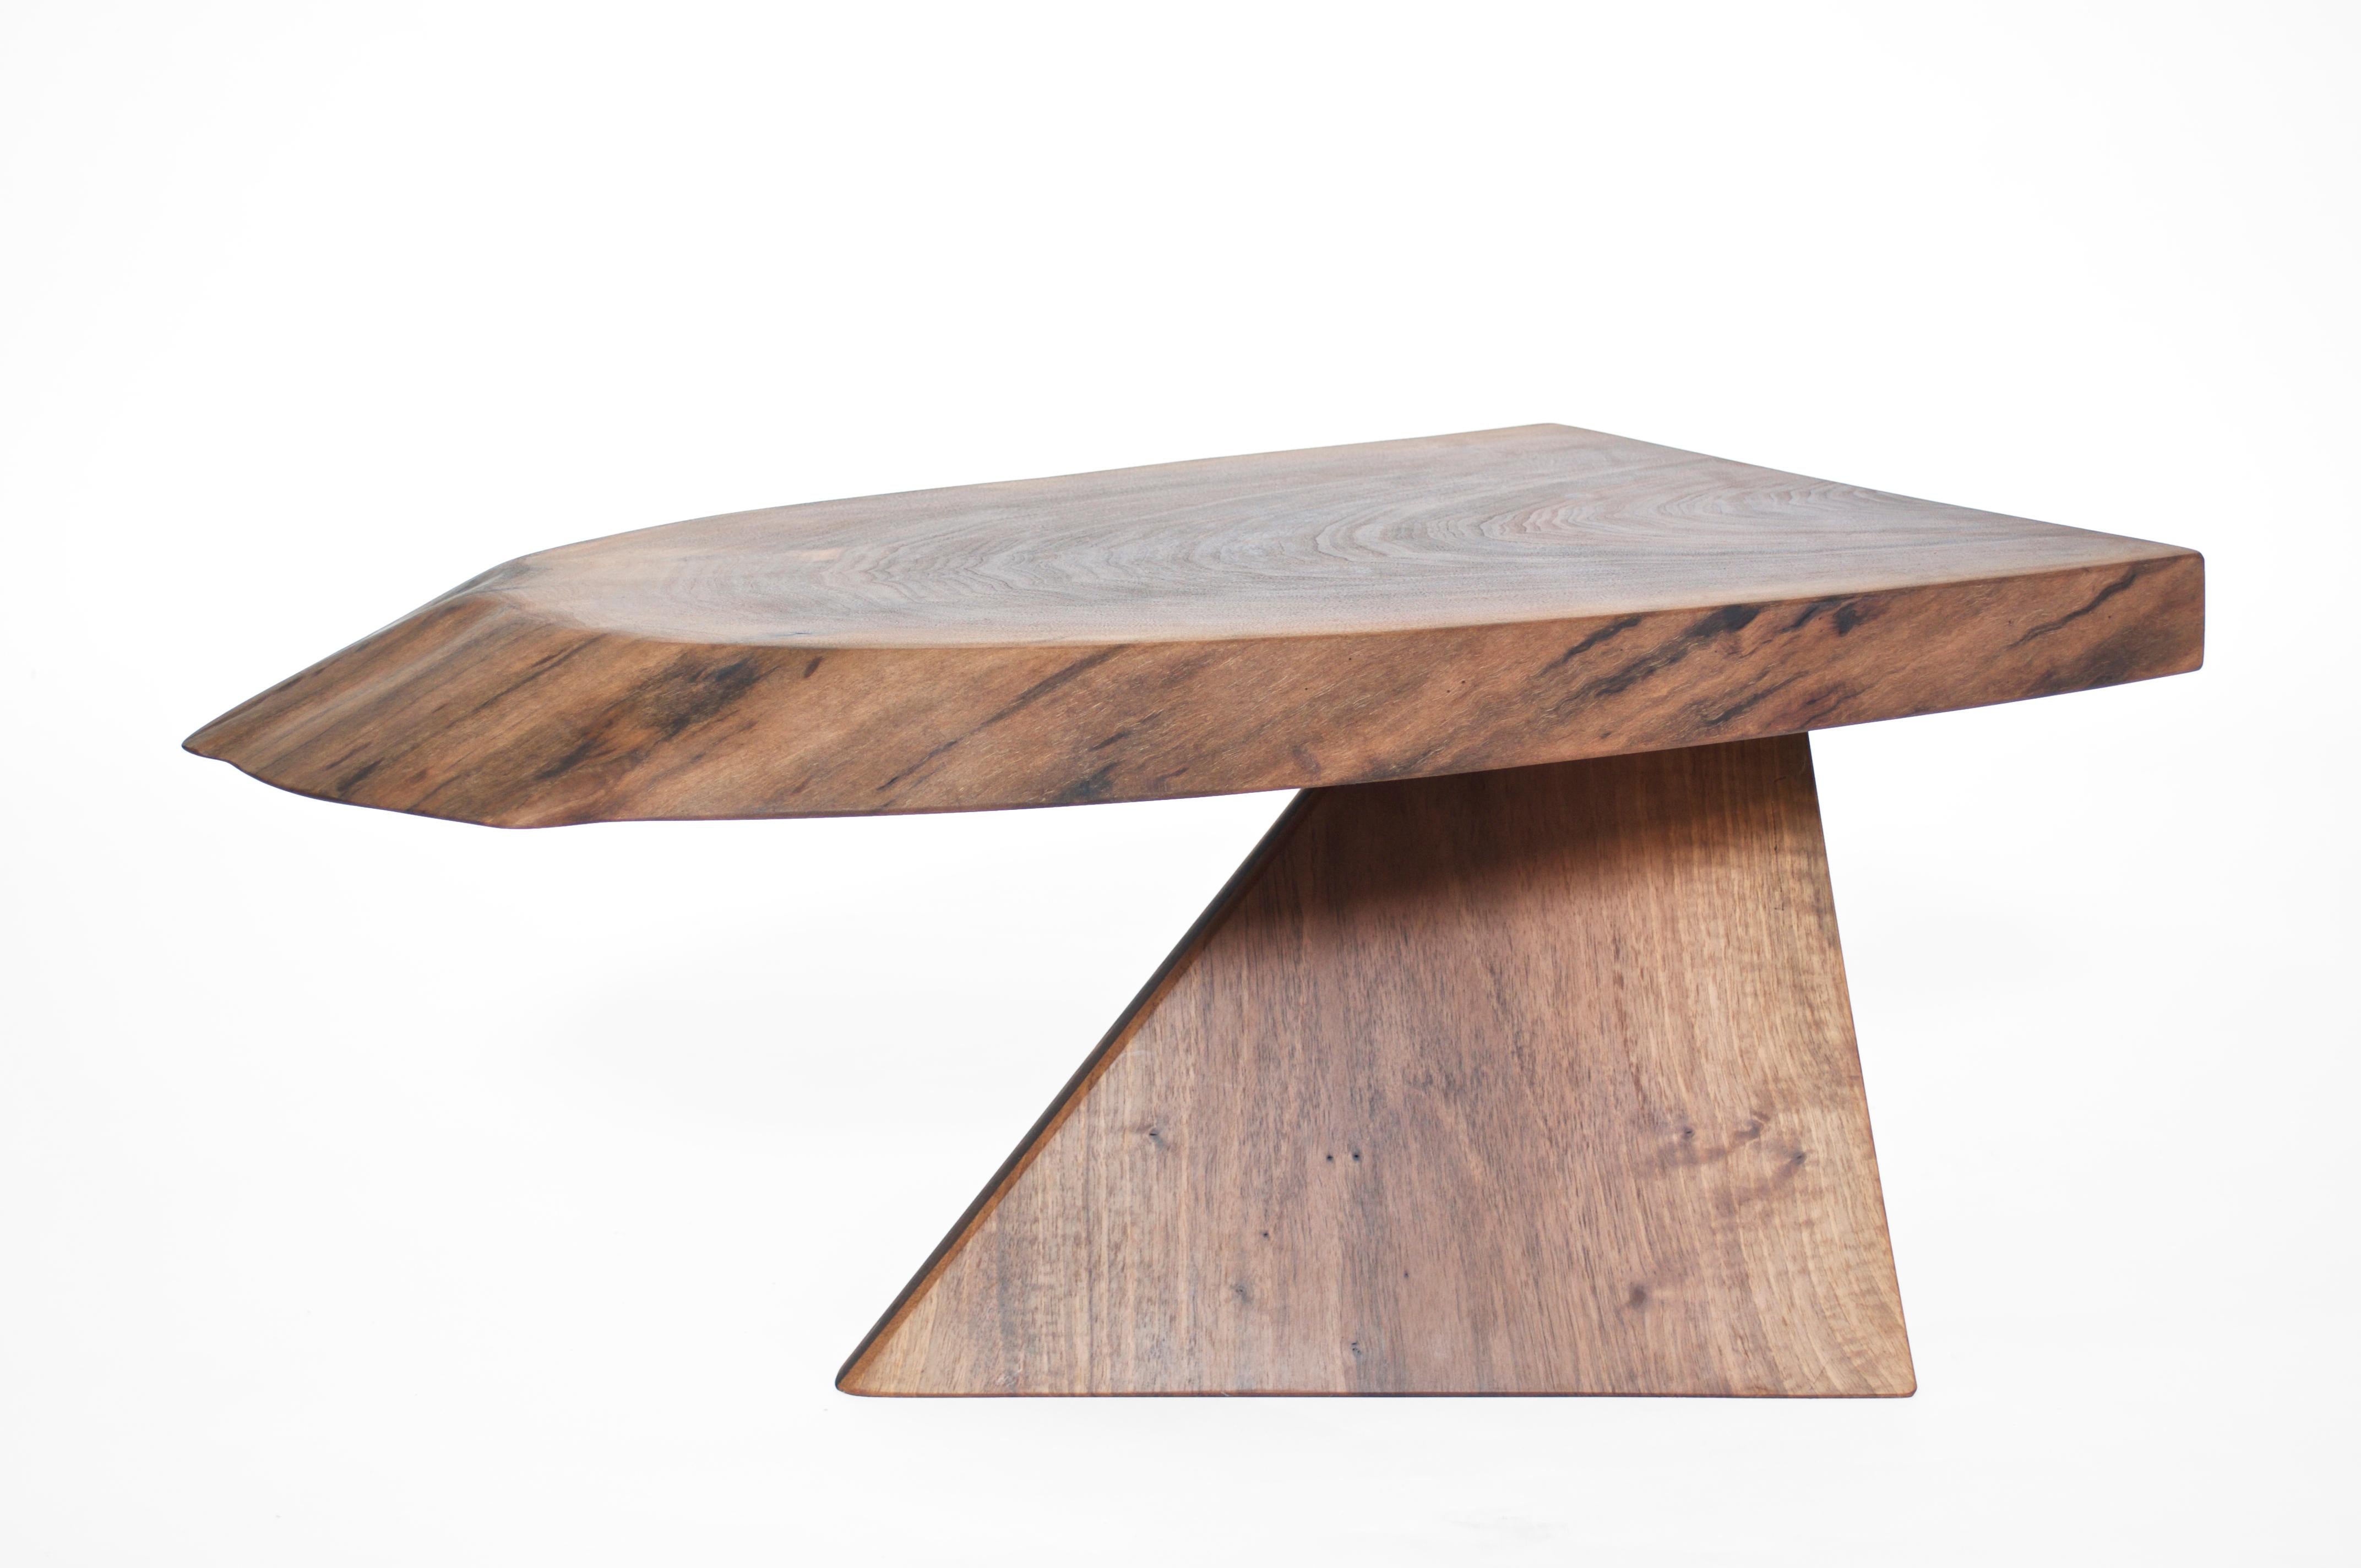 Unique signed table by Jörg Pietschmann T2601
Materials: Walnut, polished oil finish
Measures: H 35 x W 78 x D 47 cm

In Pietschmann’s sculptures, trees that for centuries were part of a landscape and founded in primordial forces tell stories